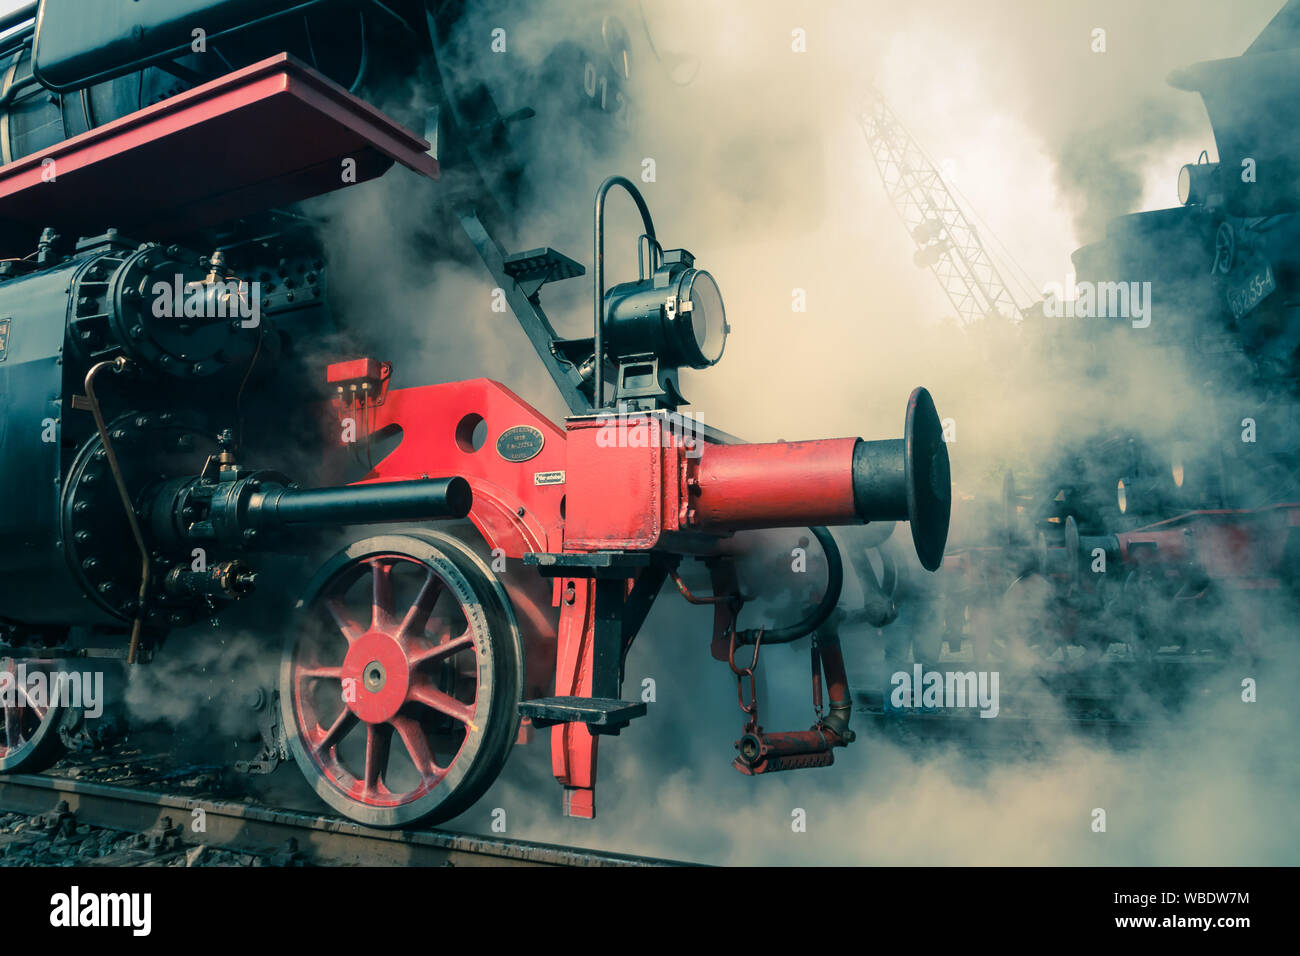 Old steam locomotive in a depot Stock Photo